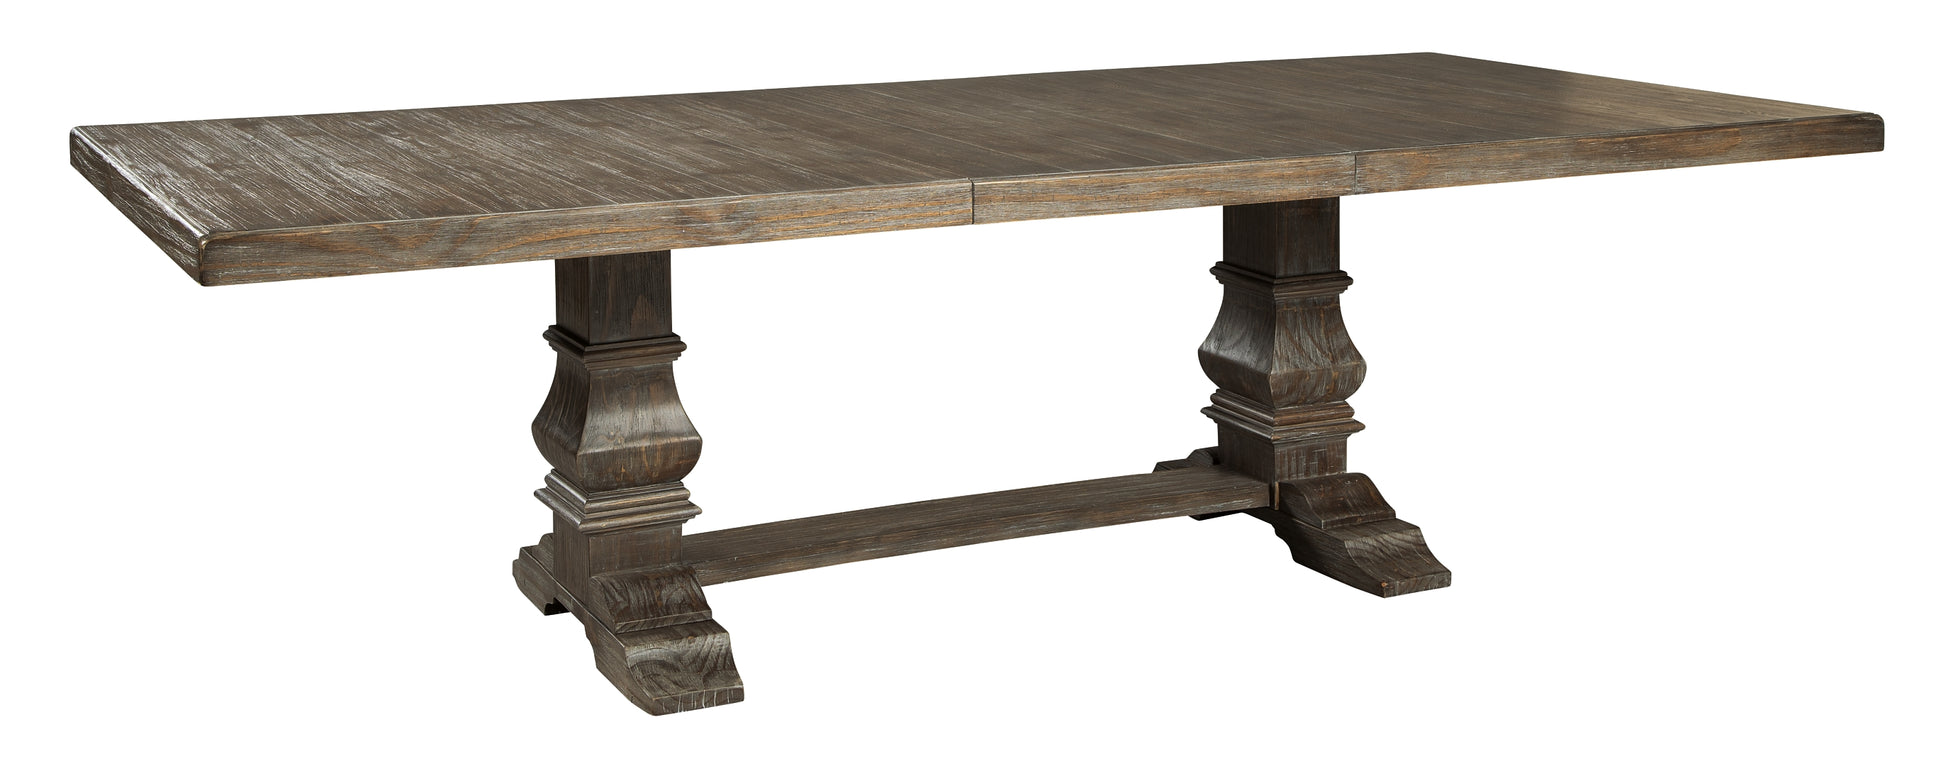 Wyndahl Dining Table and 4 Chairs JB's Furniture  Home Furniture, Home Decor, Furniture Store